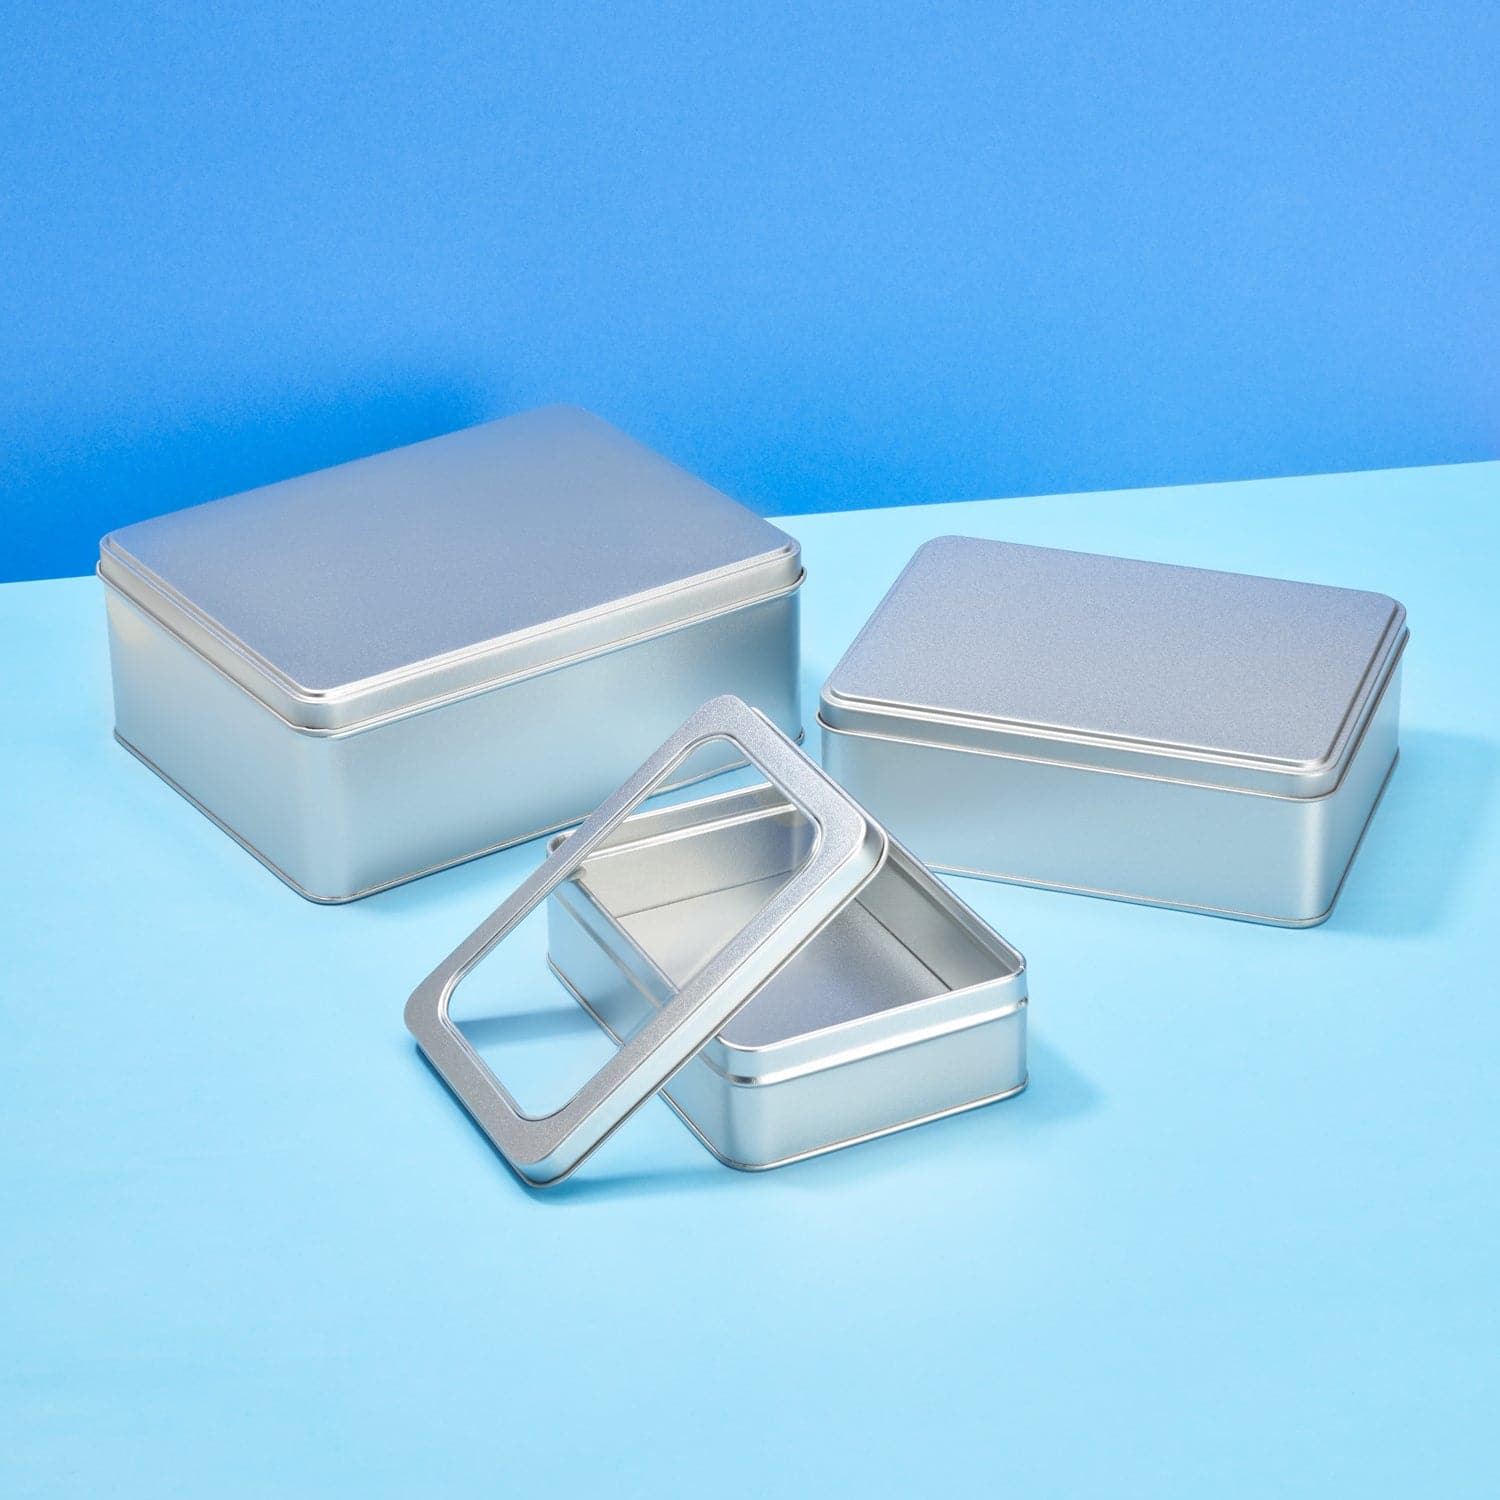 A collection of large silver rectangular tins two with traditional lids and one with a window lid to show the contents inside.